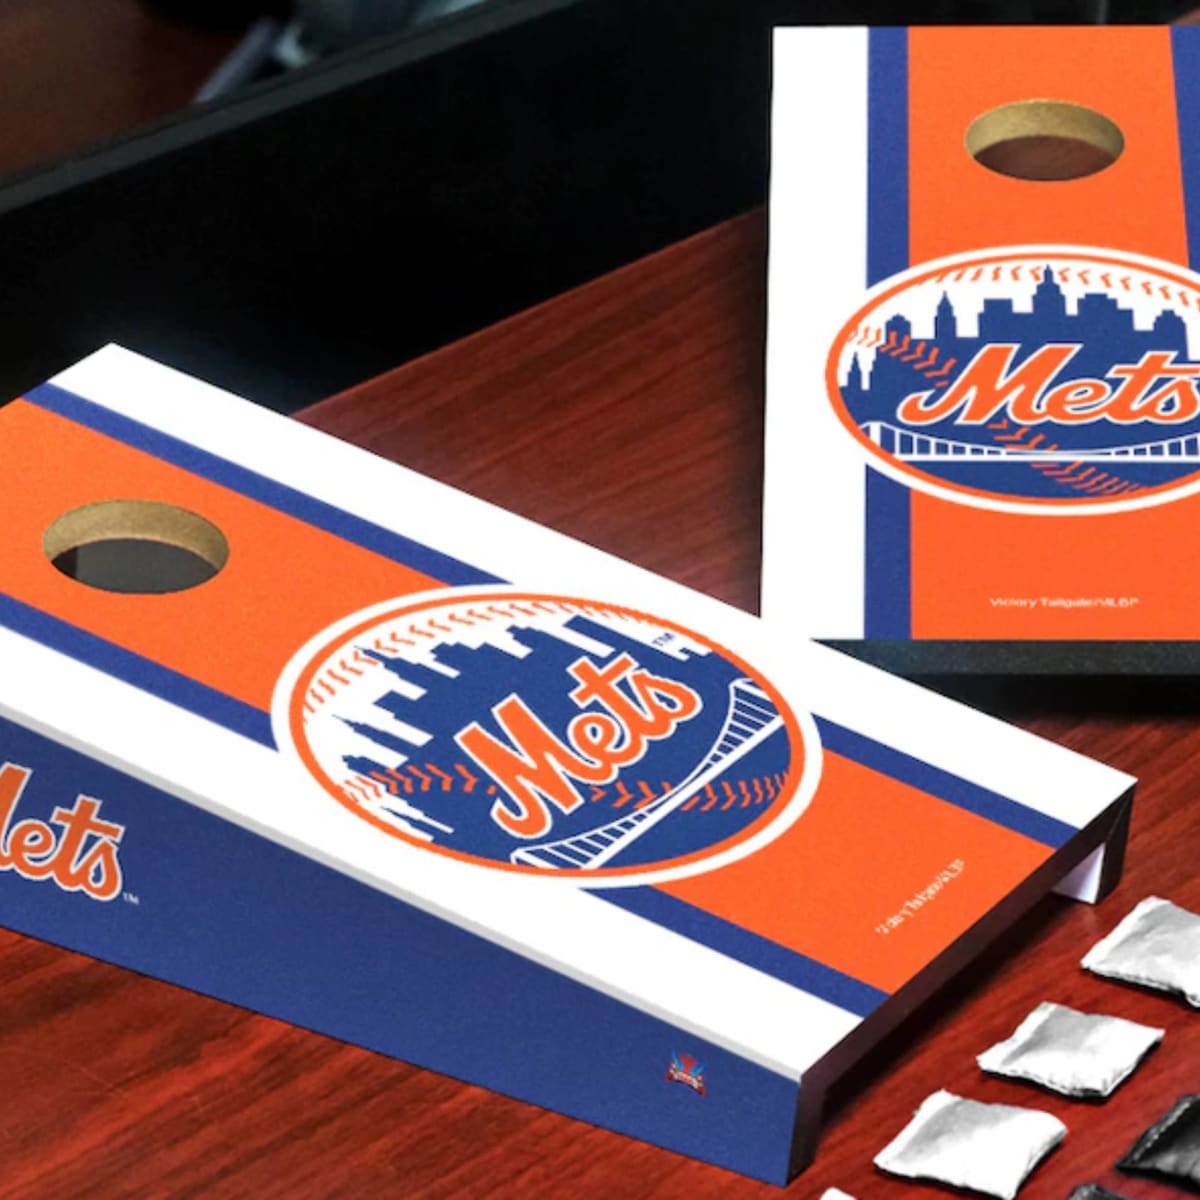 New York Mets: Show Your Support With This Gear - Sports Illustrated